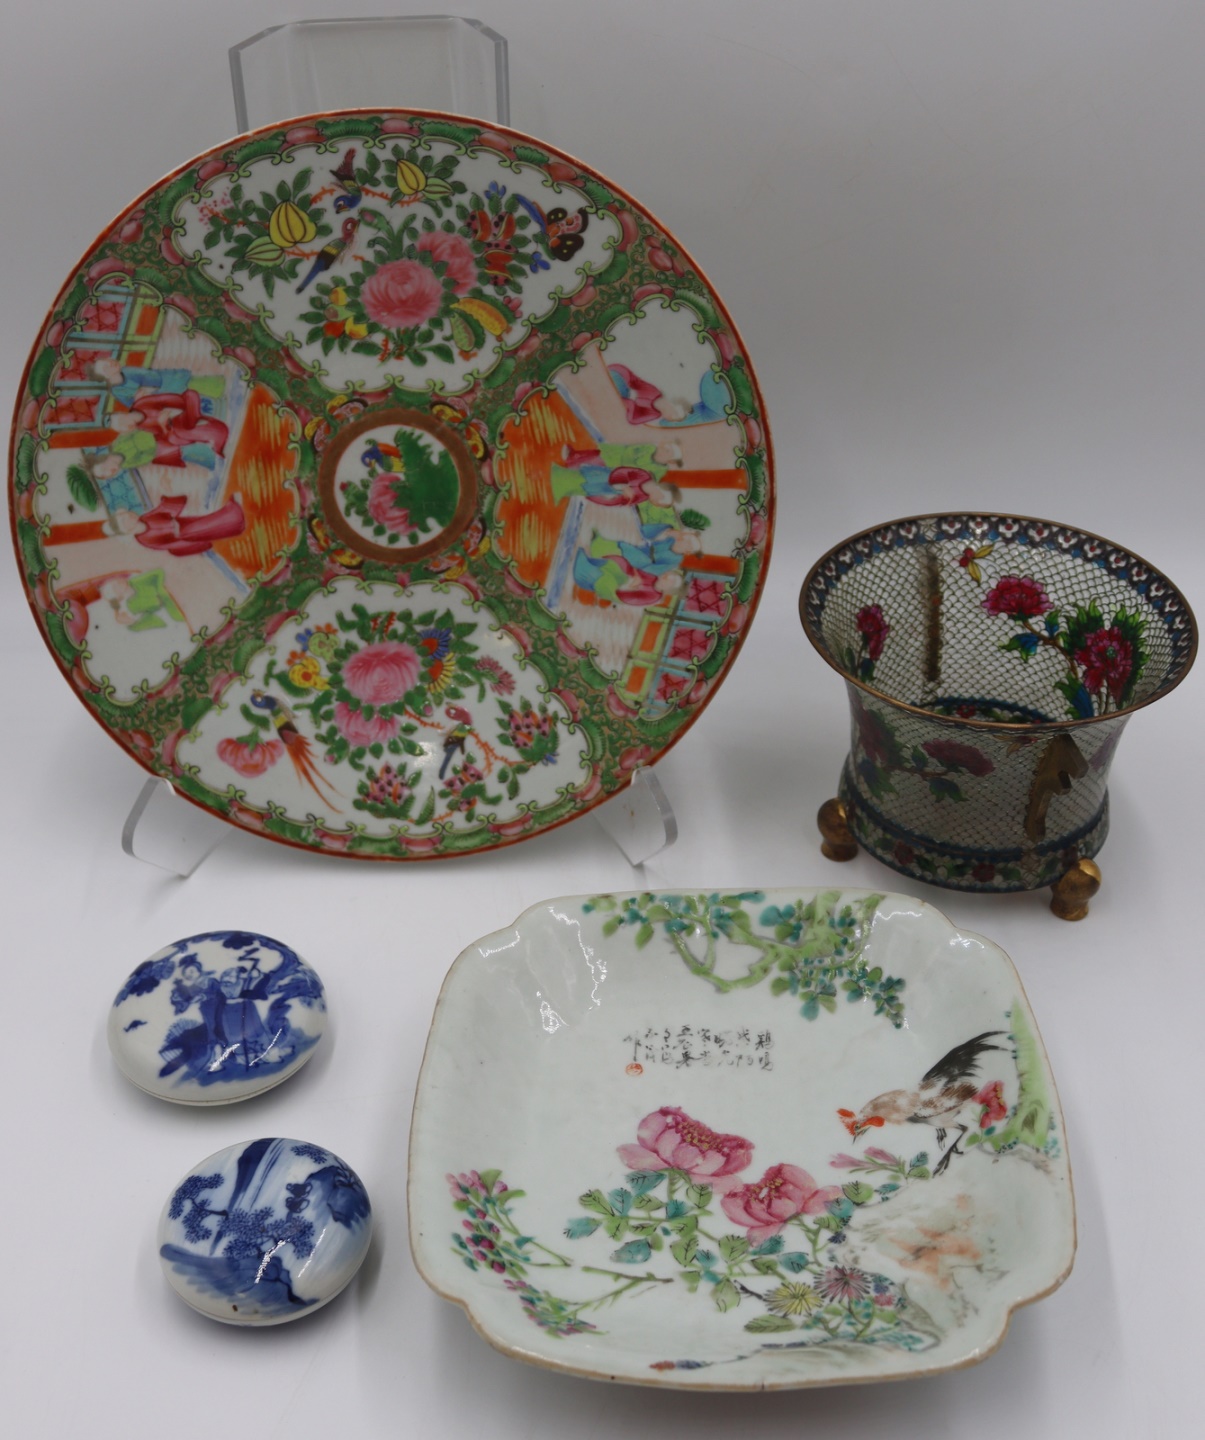 GROUPING OF CHINESE PORCELAIN AND 3bcb28